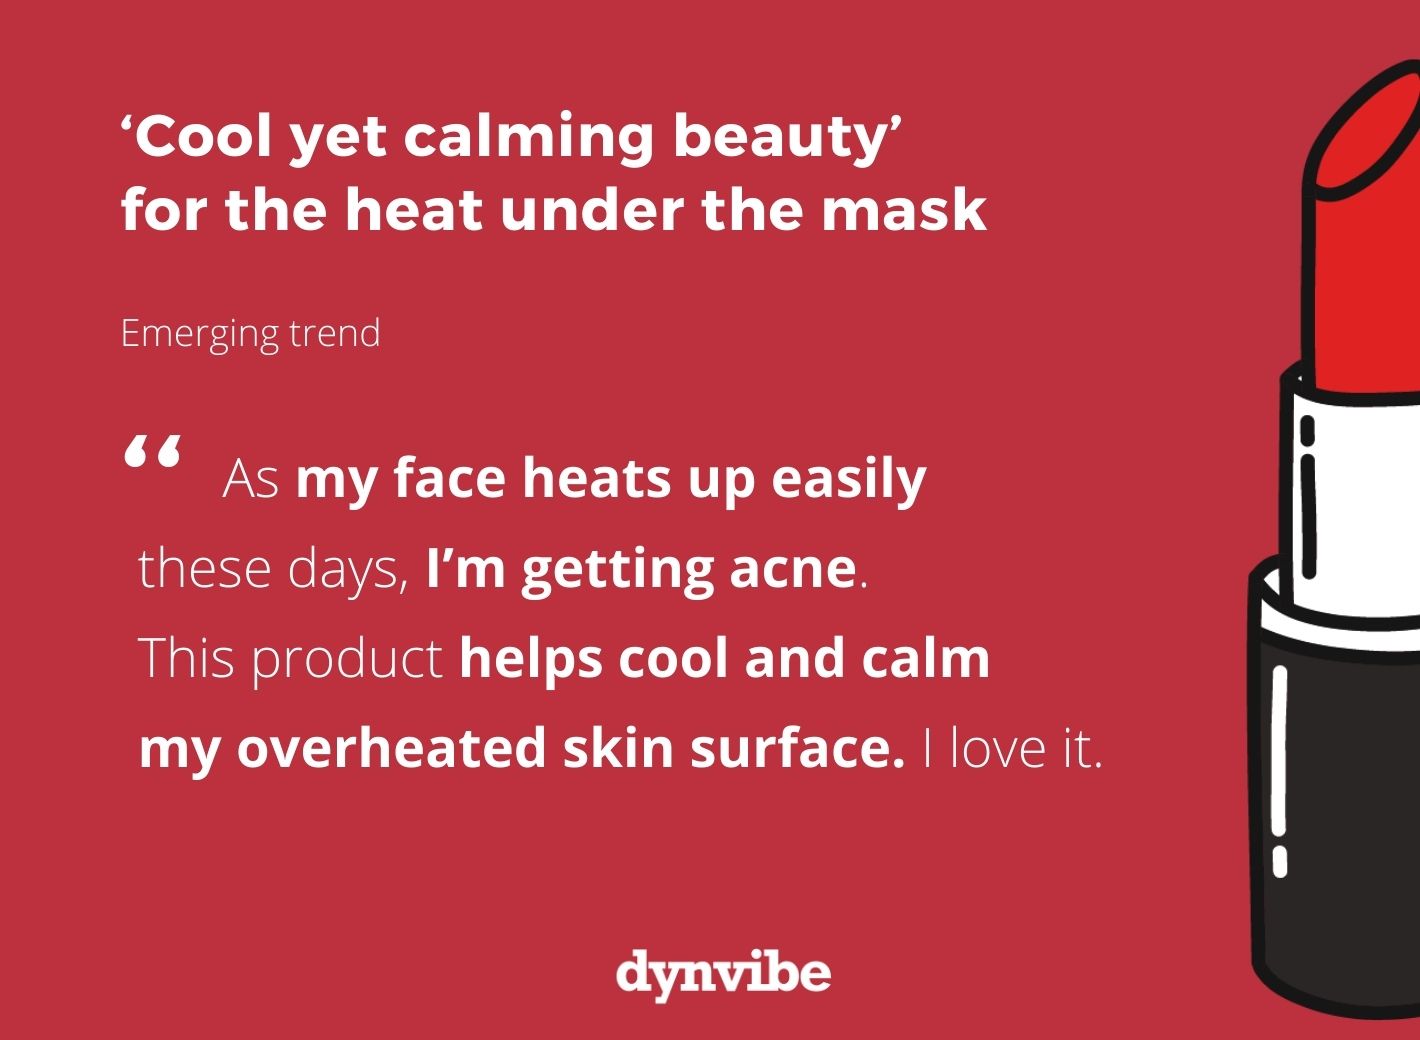 ‘Cool yet calming beauty’ for the heat under the mask